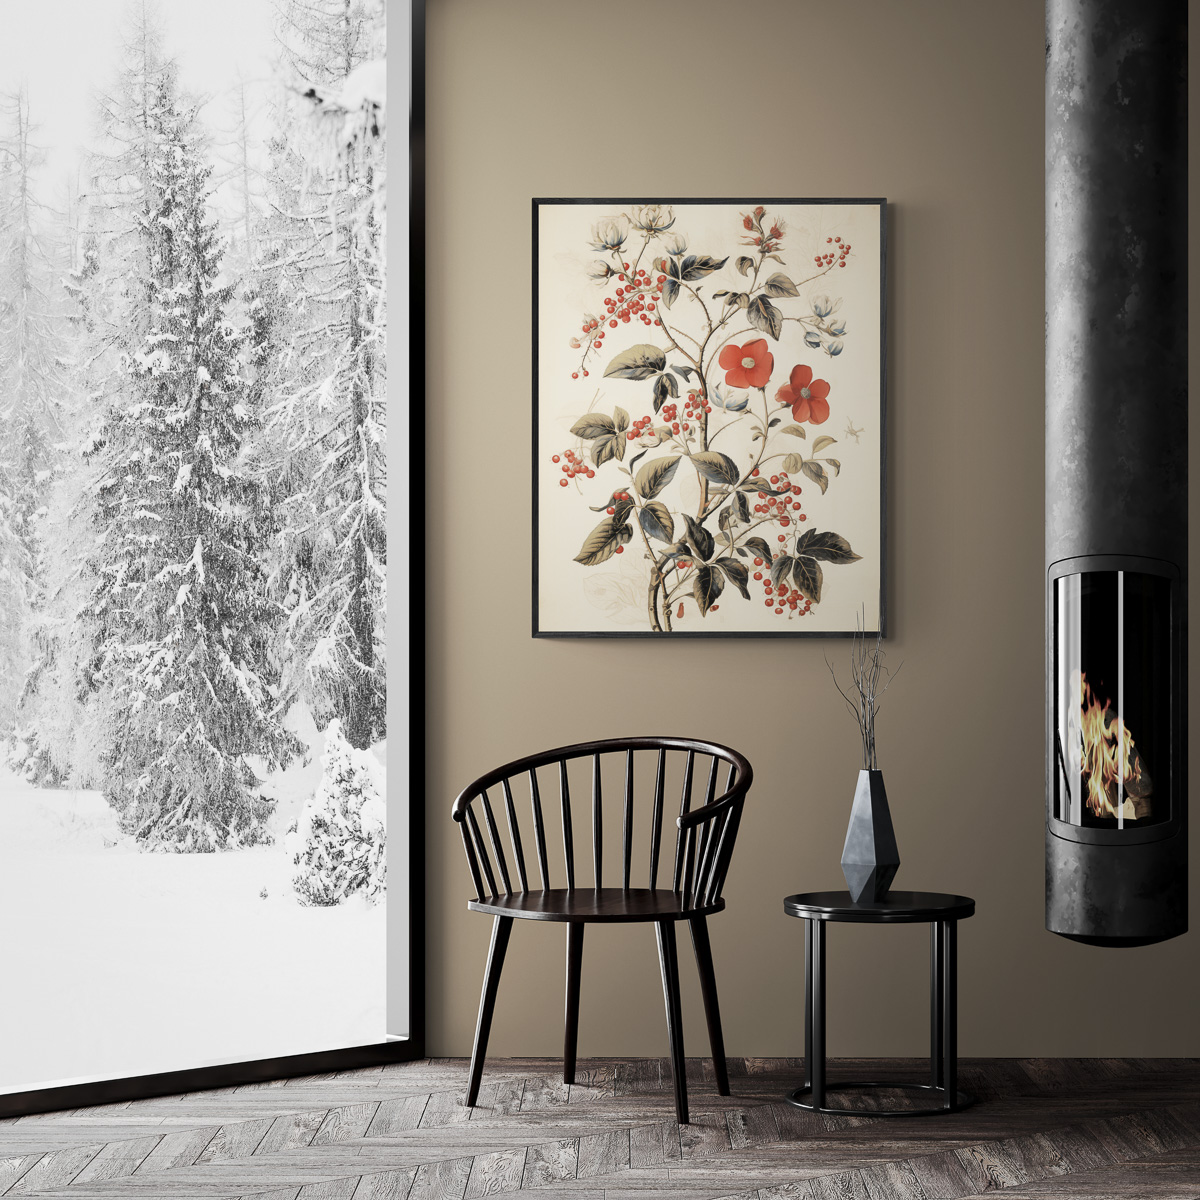 Vintage Floral Berries Wall Art Poster in a Cozy Interior with Winter Views and Fireplace